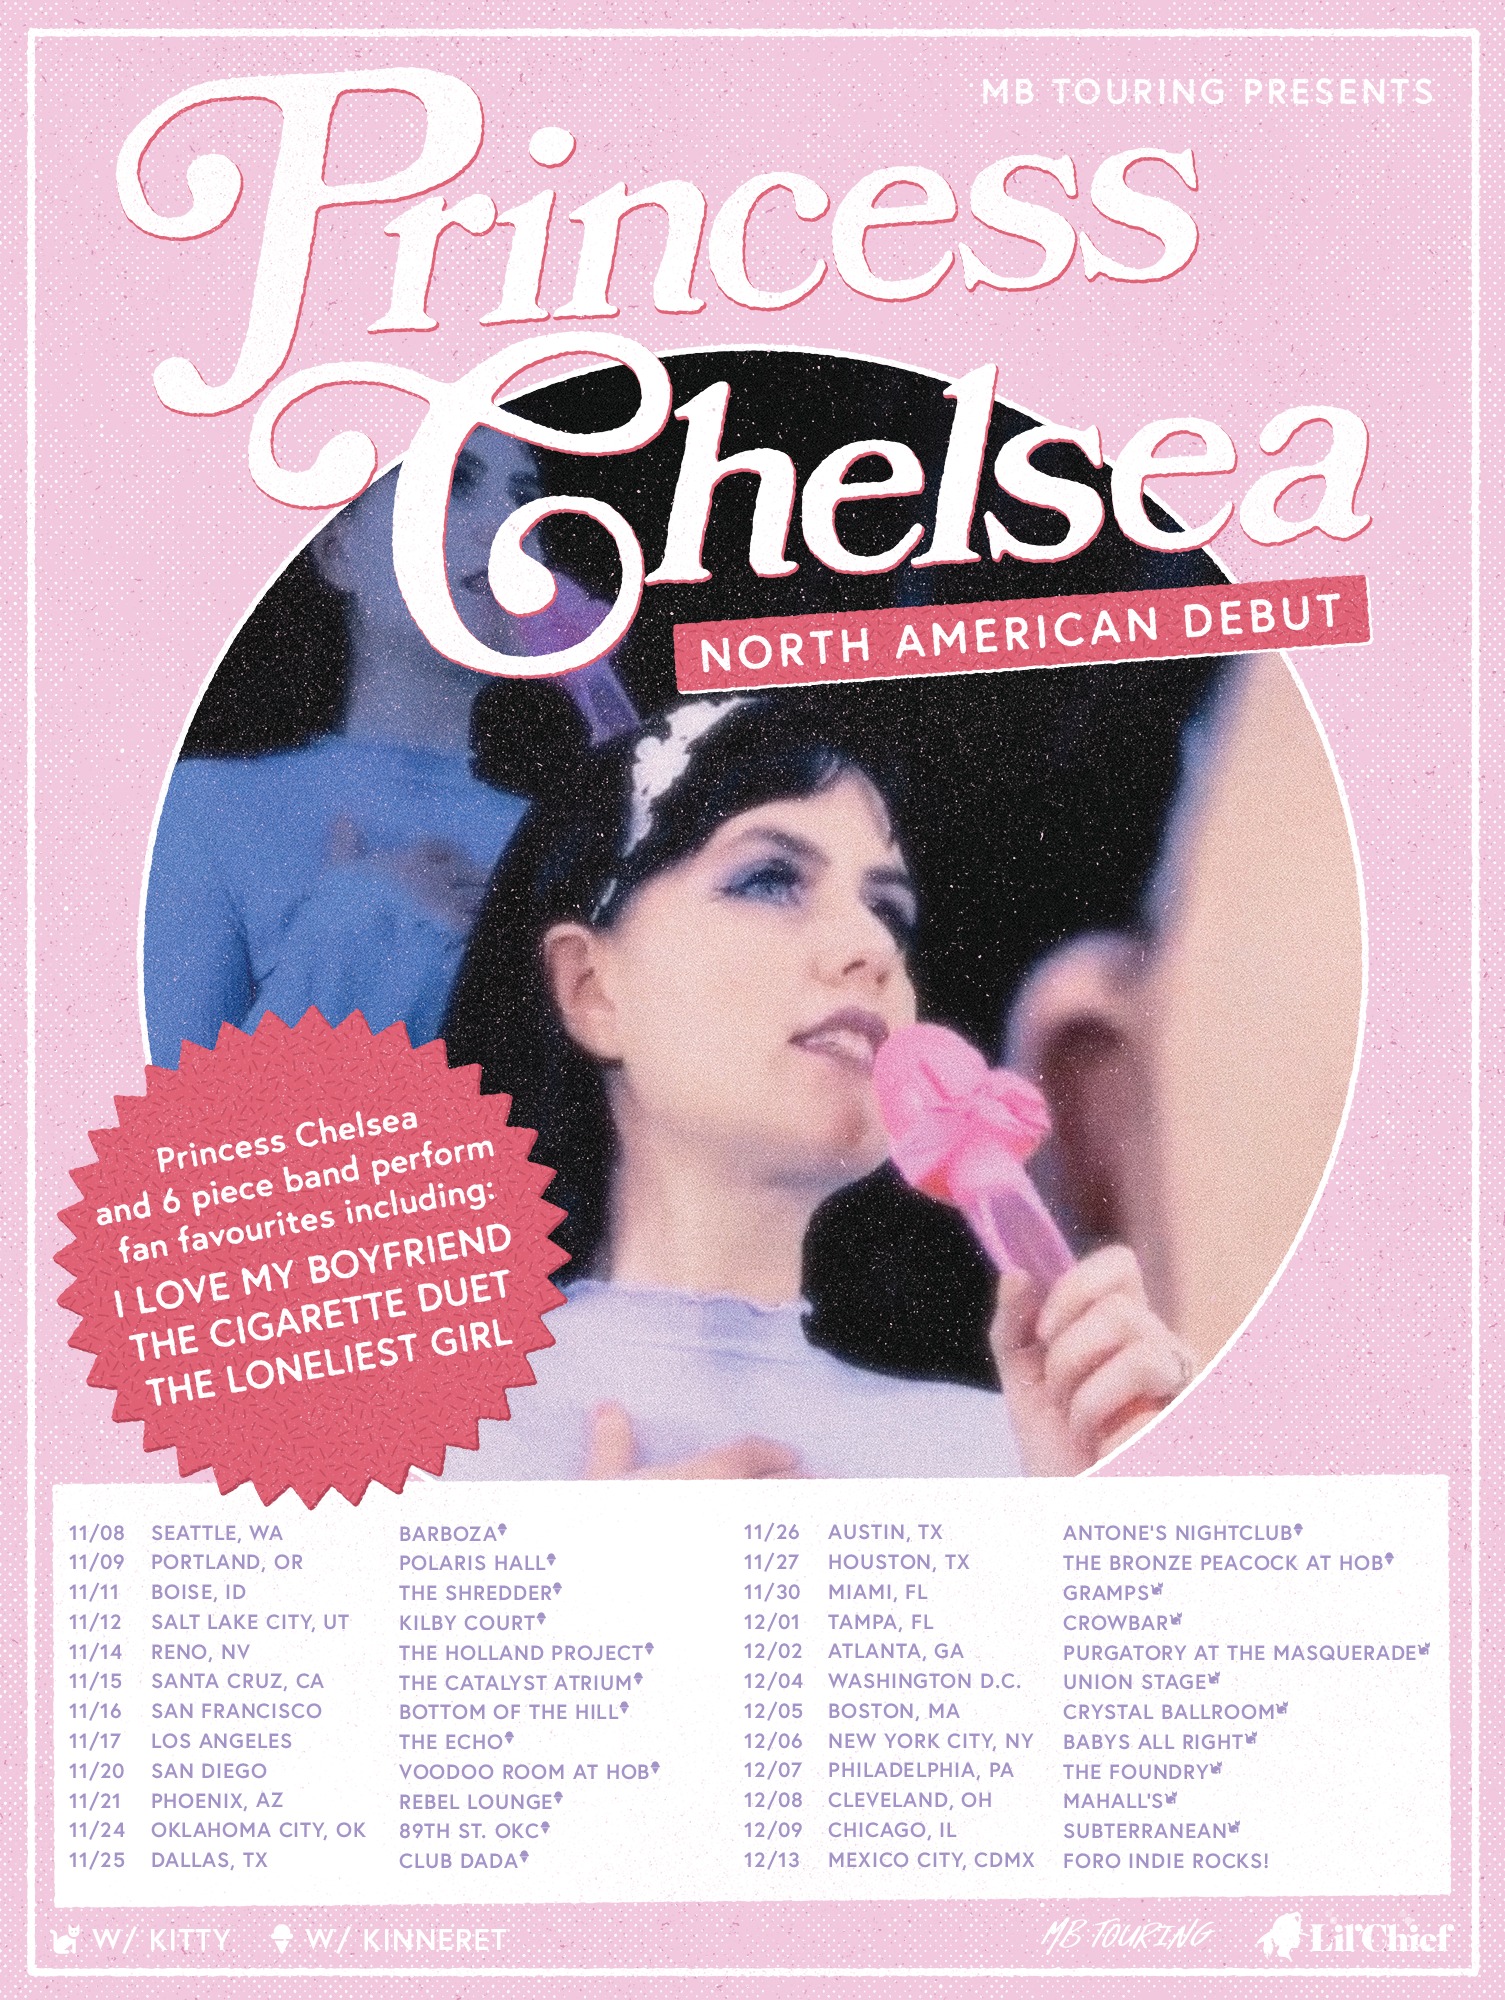 Princess Chelsea tour poster, dates in text below